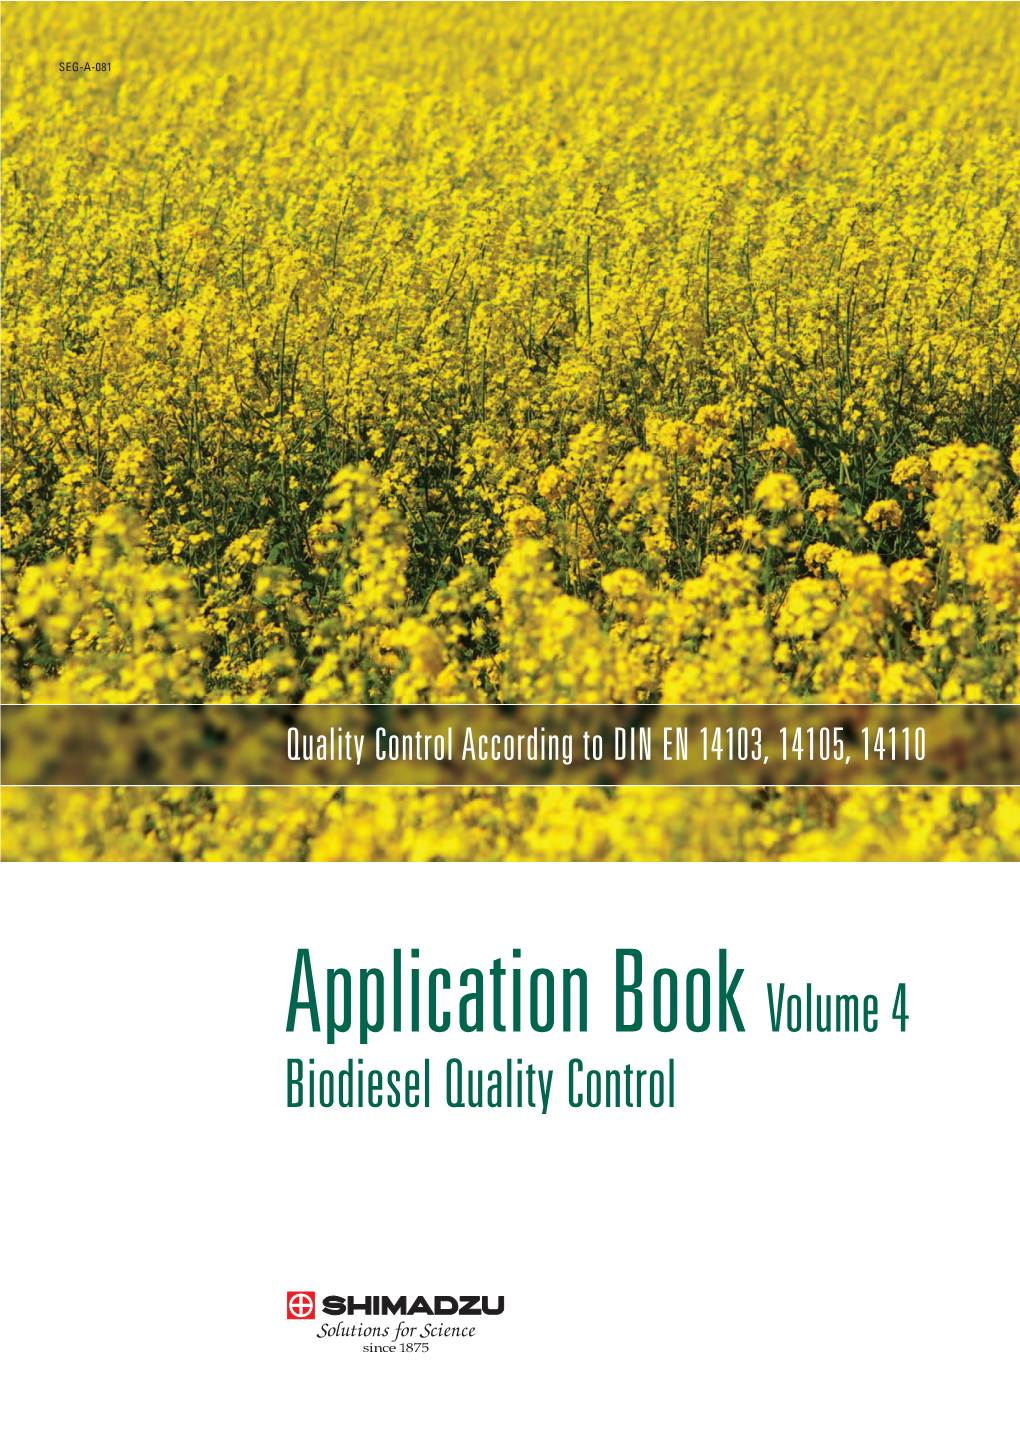 Application Book Volume 4 Biodiesel Quality Control Application Book Volume 4 Biodiesel Quality Control Contents